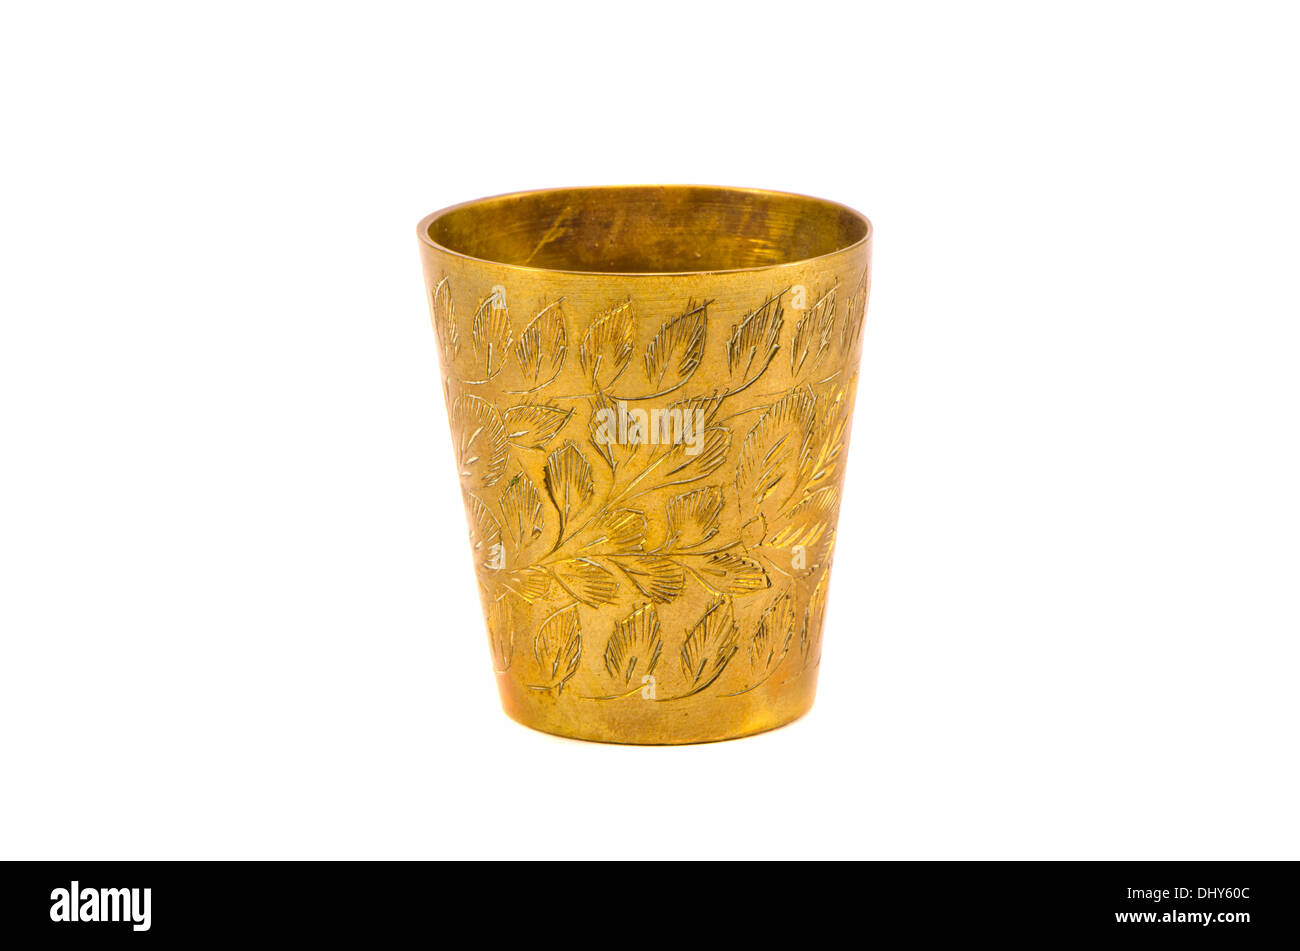 ancient engrave brass cup isolated on white background Stock Photo